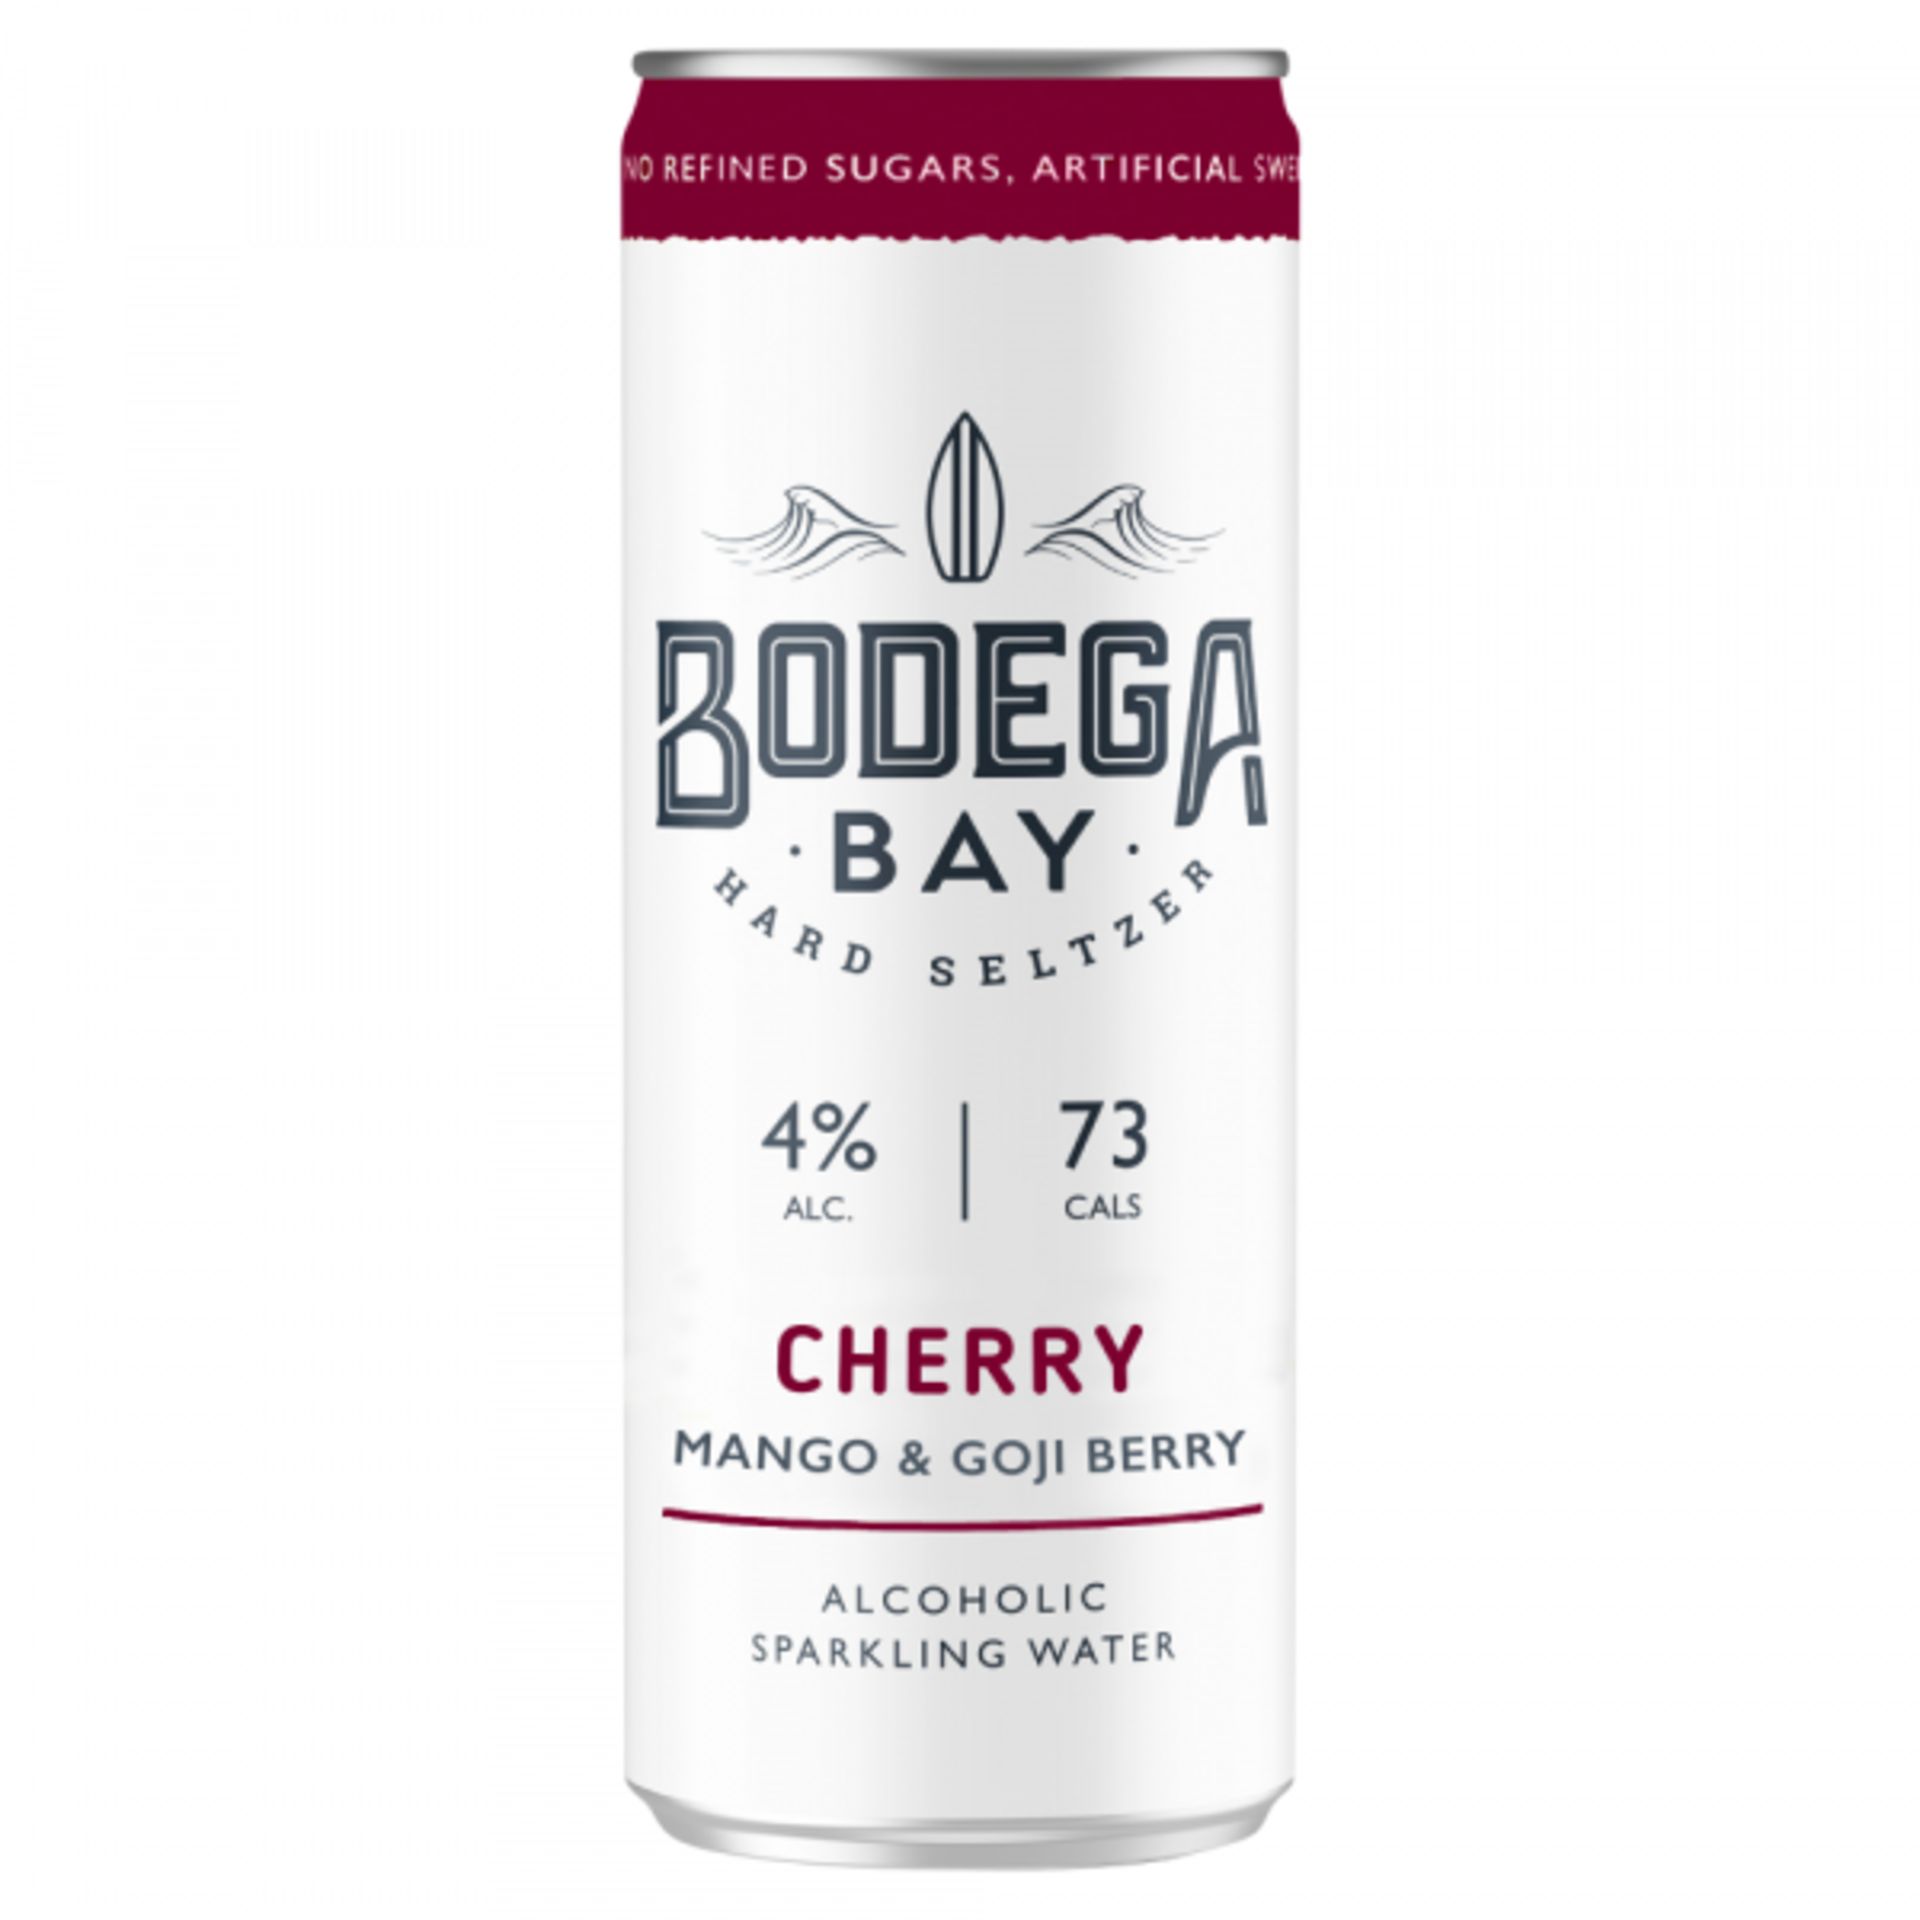 360 x Cans of Bodega Bay Hard Seltzer 250ml Alcoholic Sparkling Water Drinks - Various Flavours - Image 9 of 15